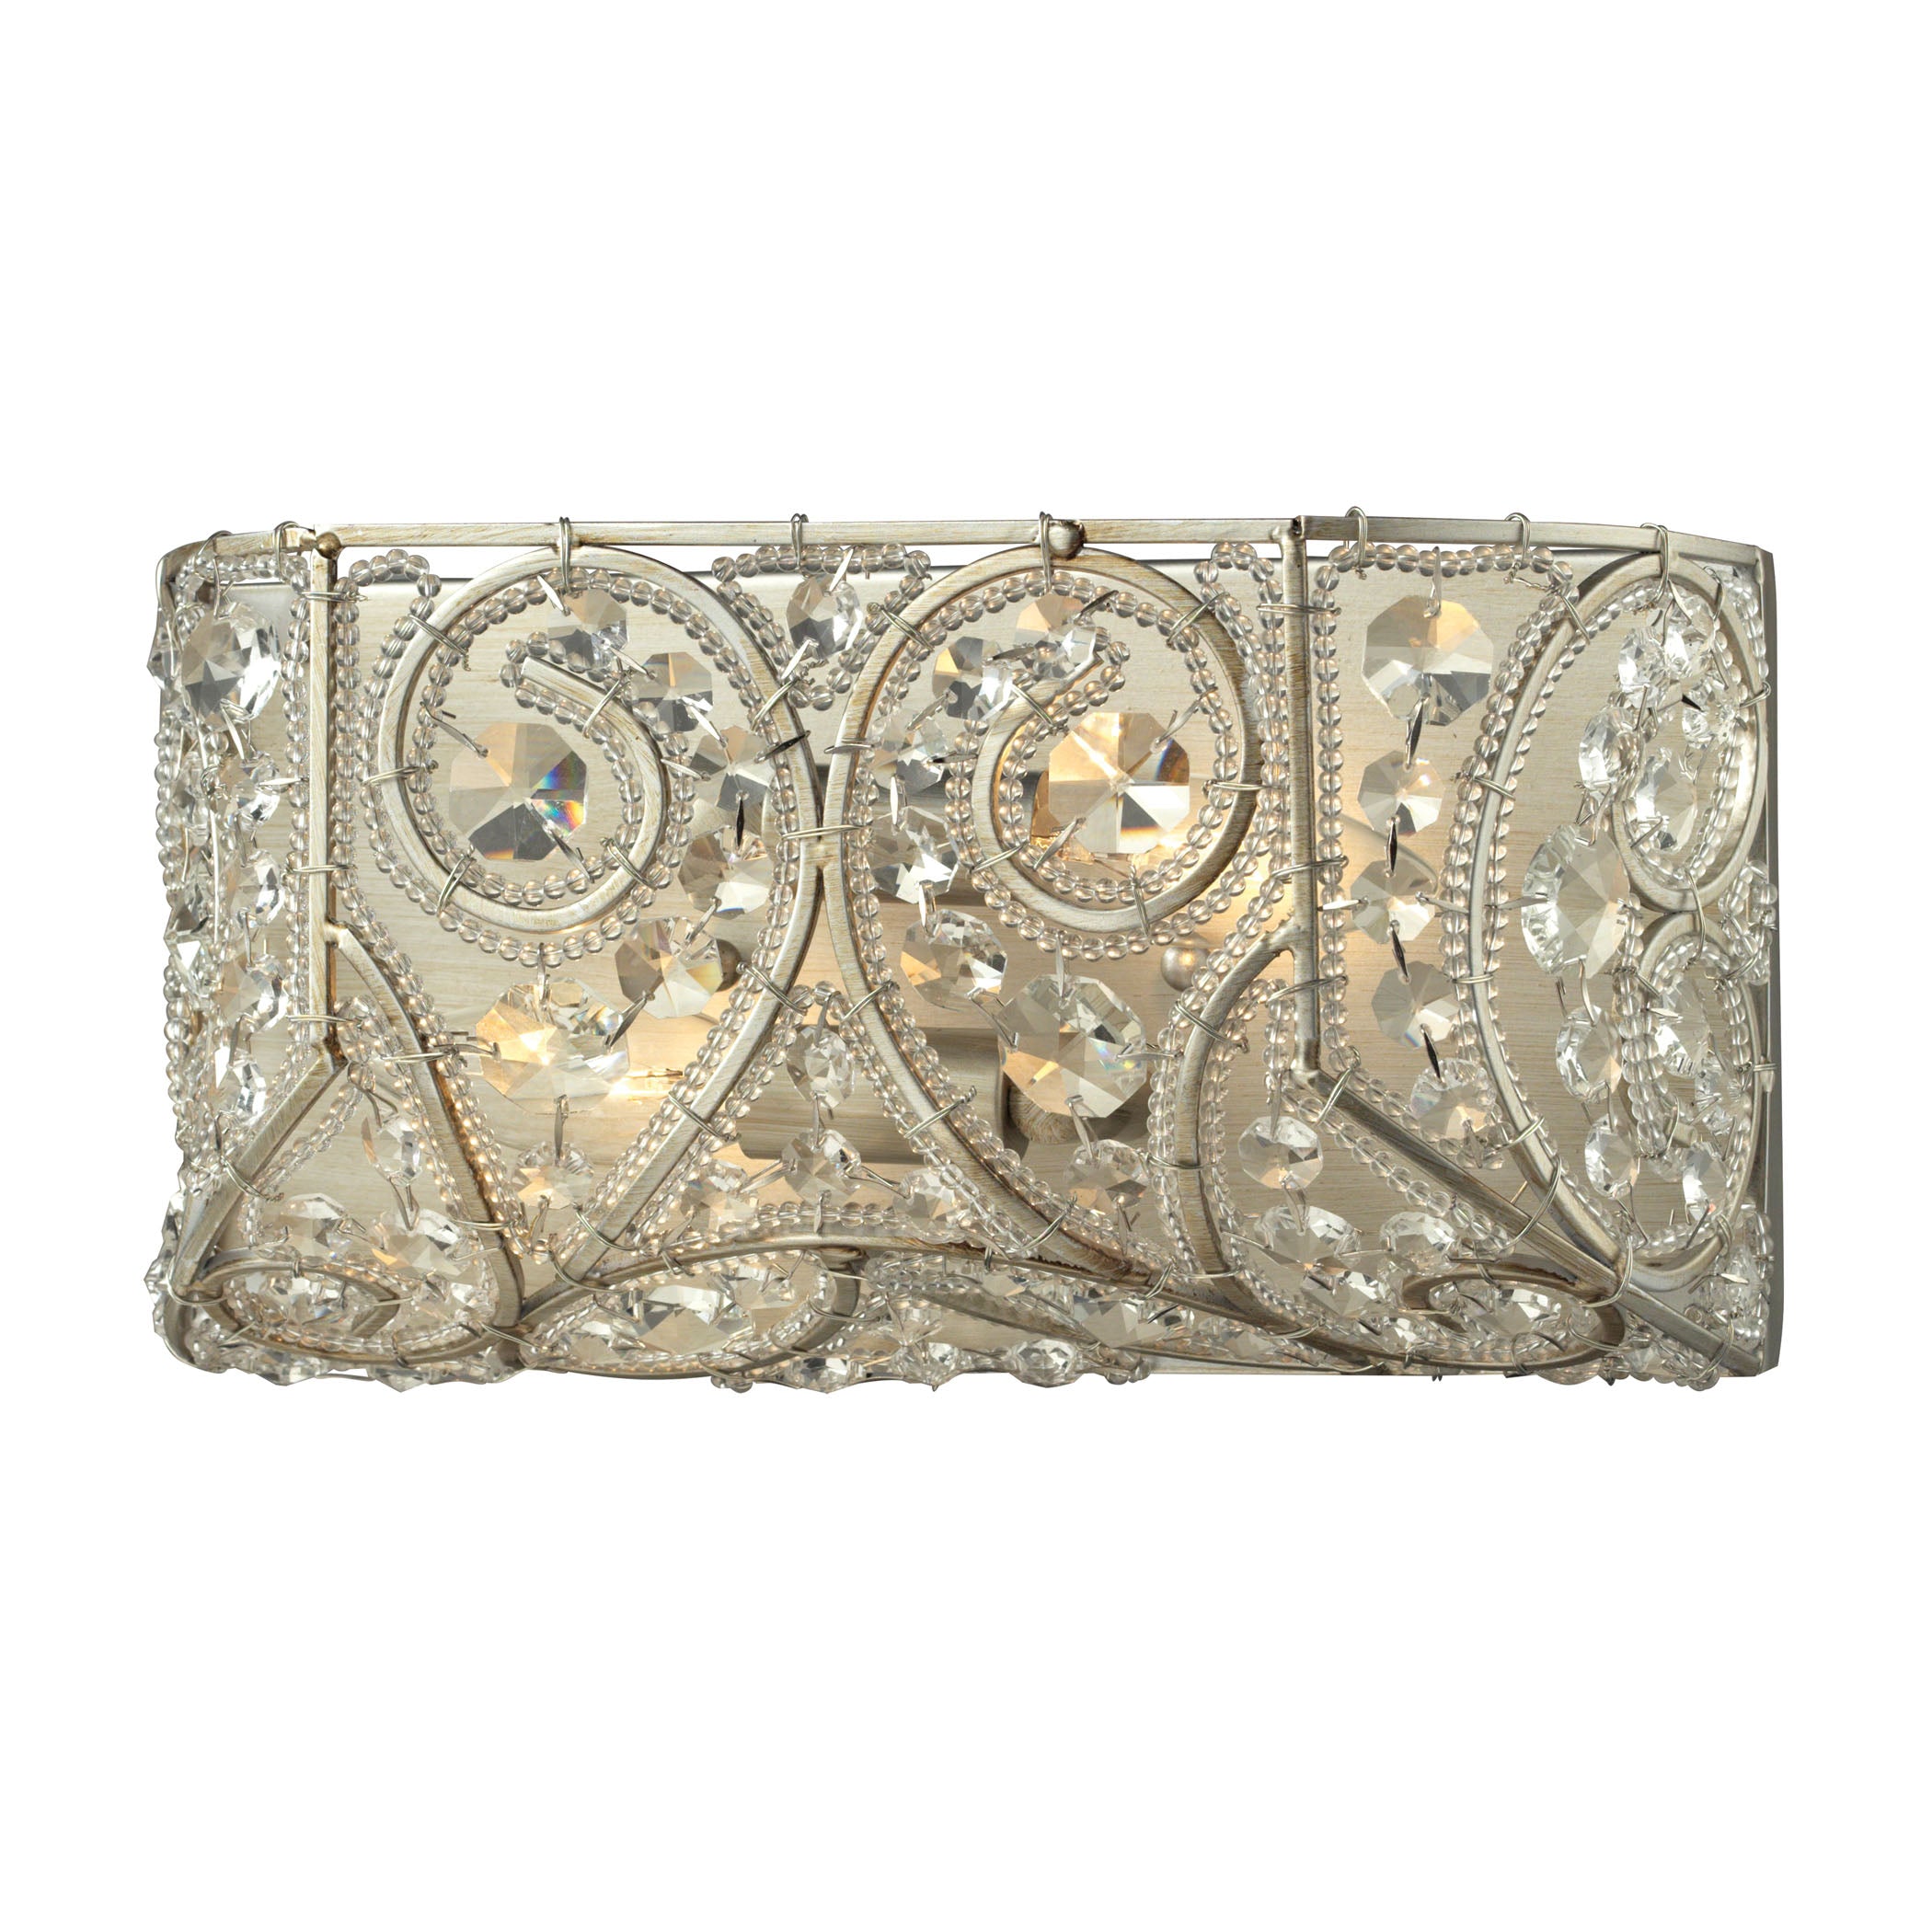 ELK Lighting 11690/2 Andalusia 2-Light Vanity Sconce in Aged Silver with Clear Crystal and Beaded Glass Diffuser